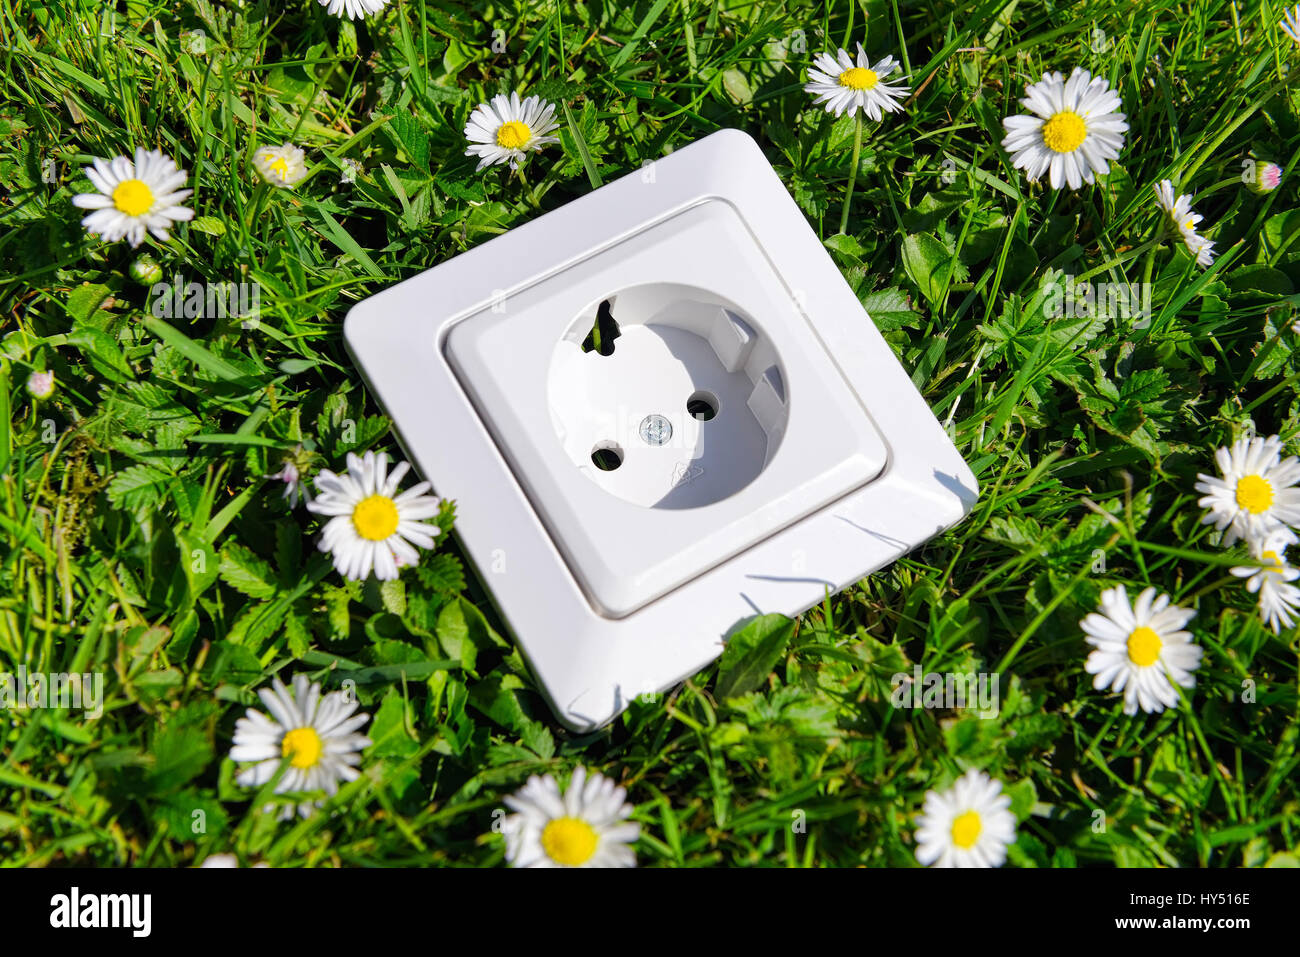 Outlet on lawn, ecological stream, Steckdose auf Rasen, oekostrom Stock Photo